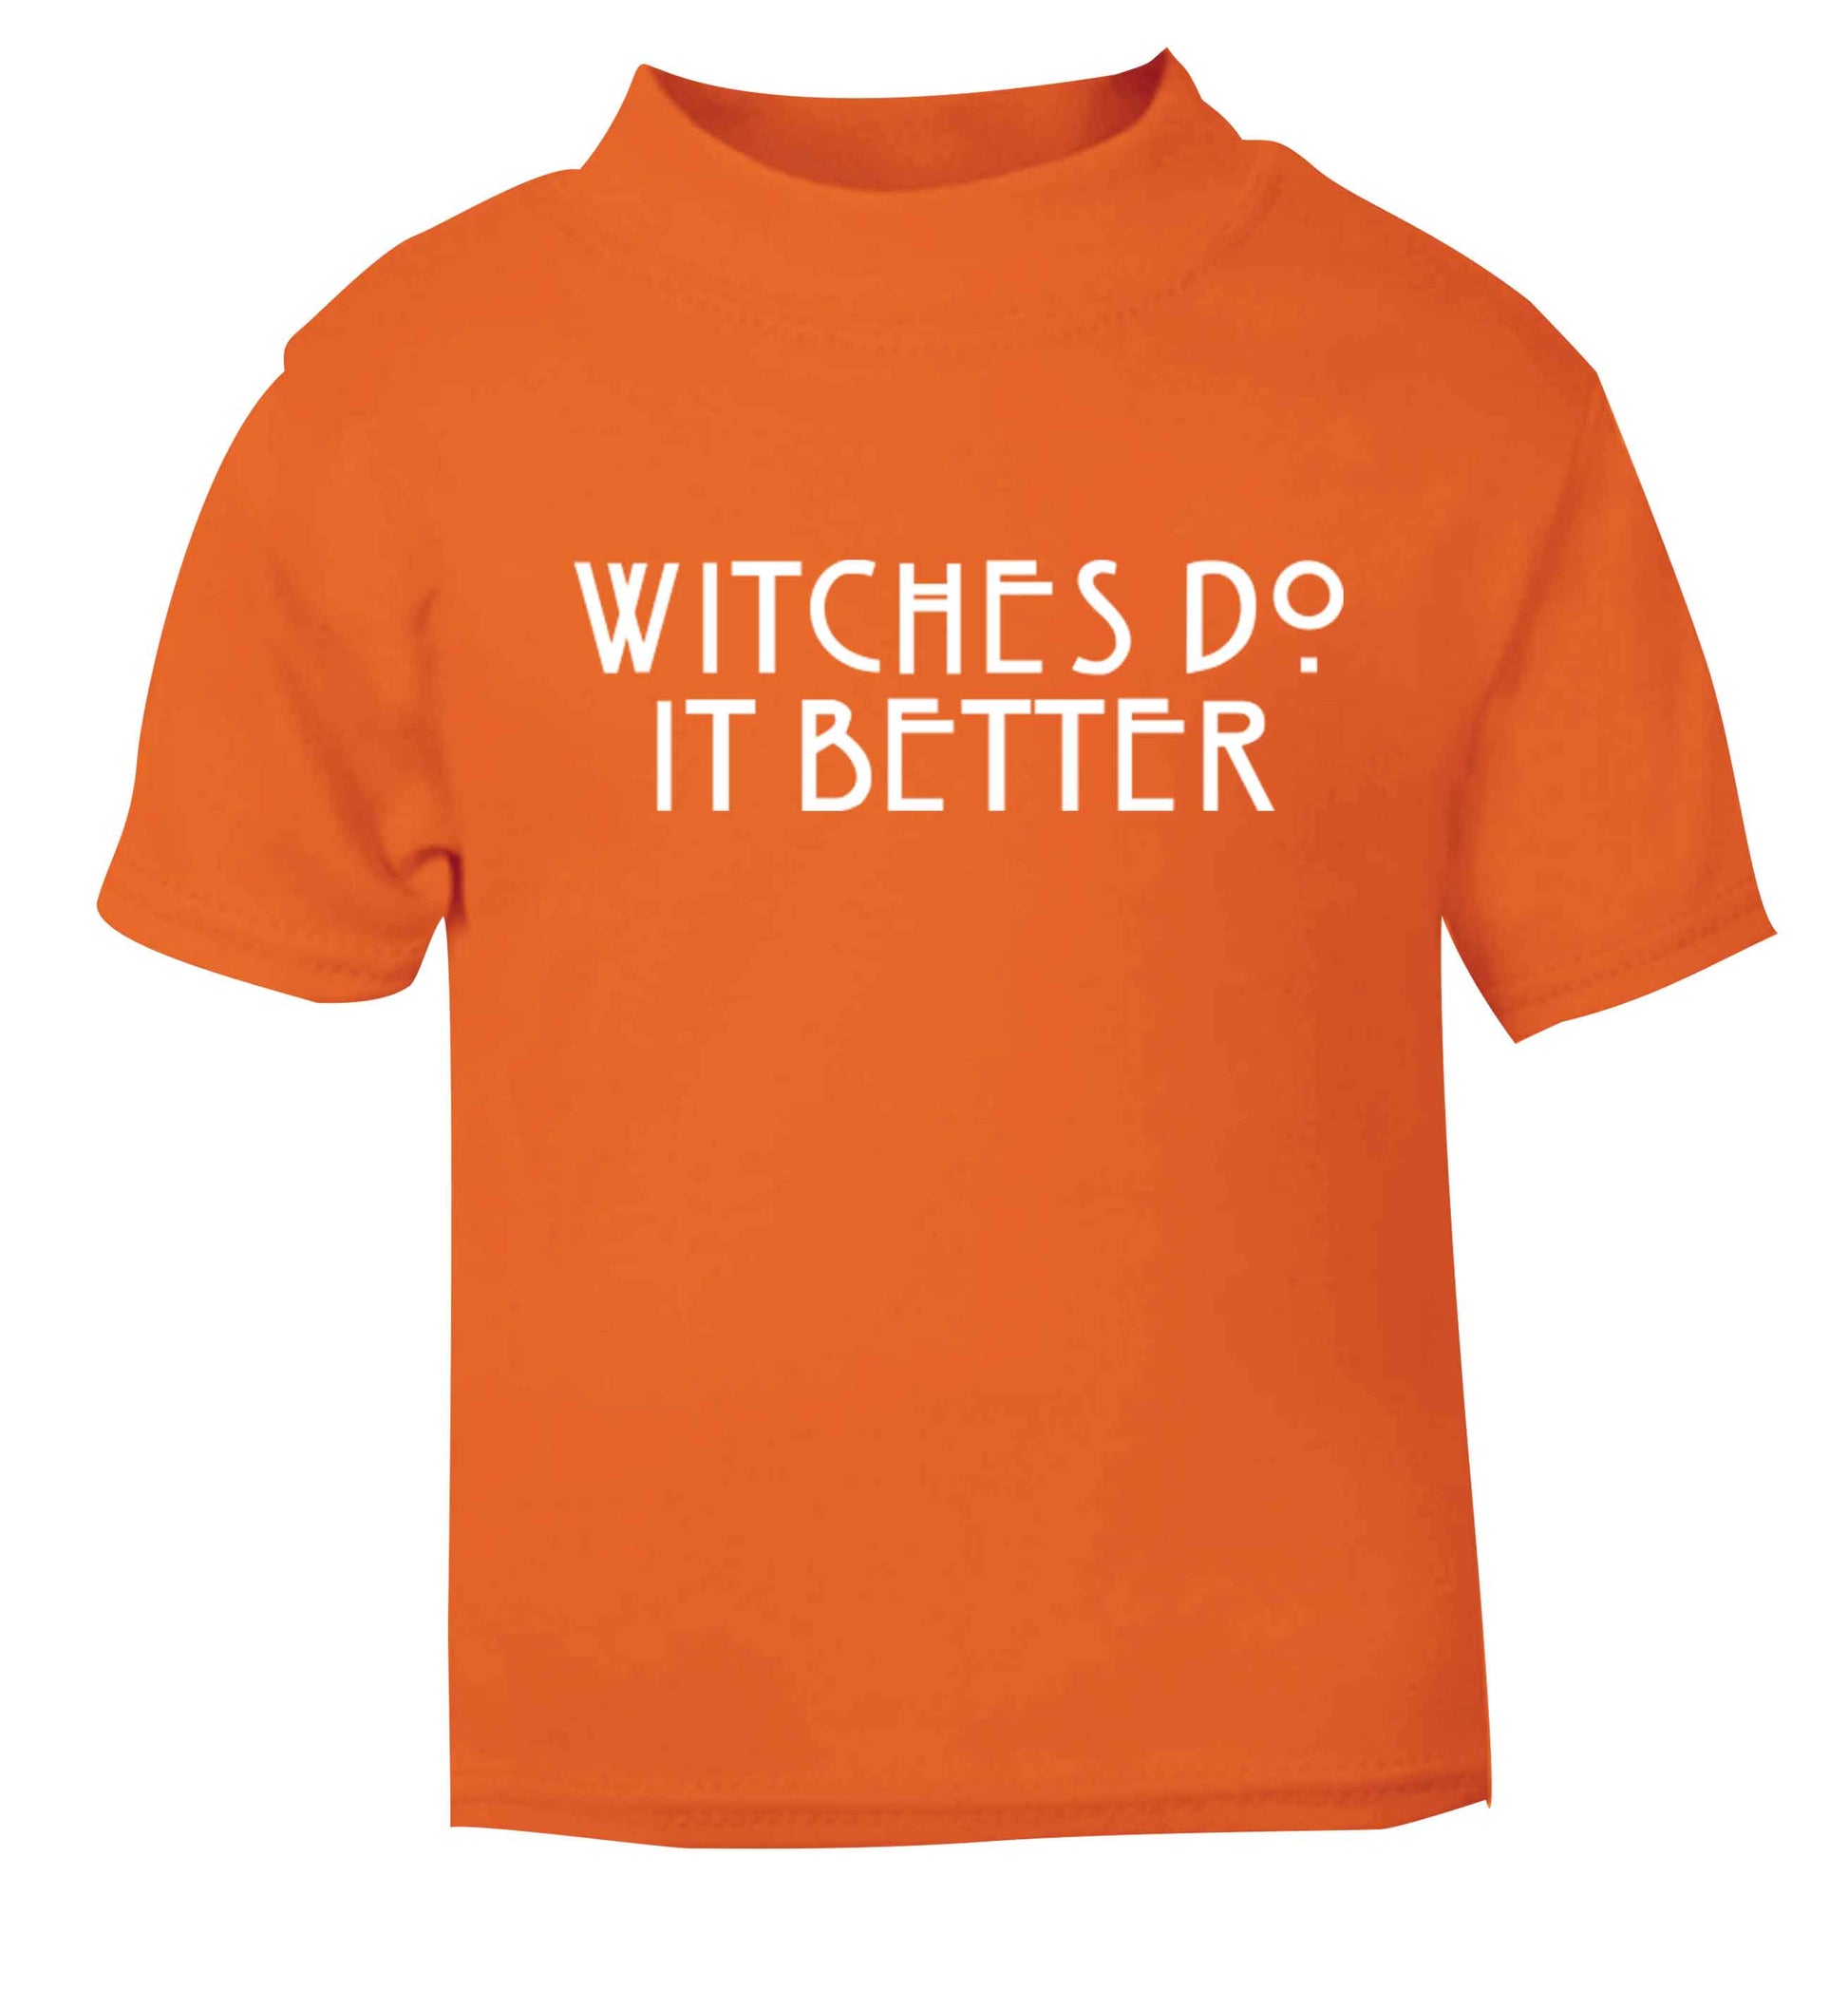 Witches do it better orange baby toddler Tshirt 2 Years